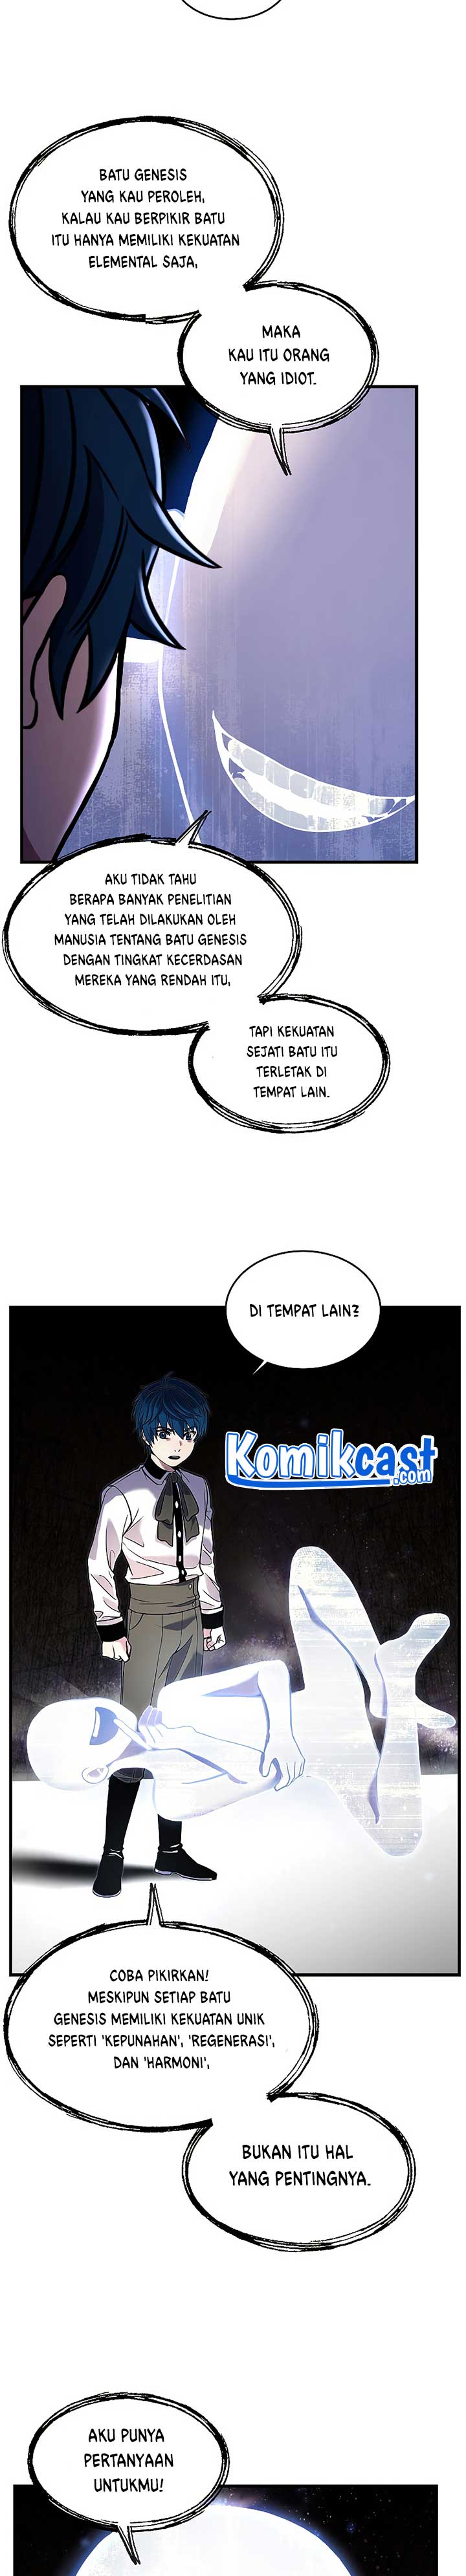 Return of The Greatest Lancer Chapter 33